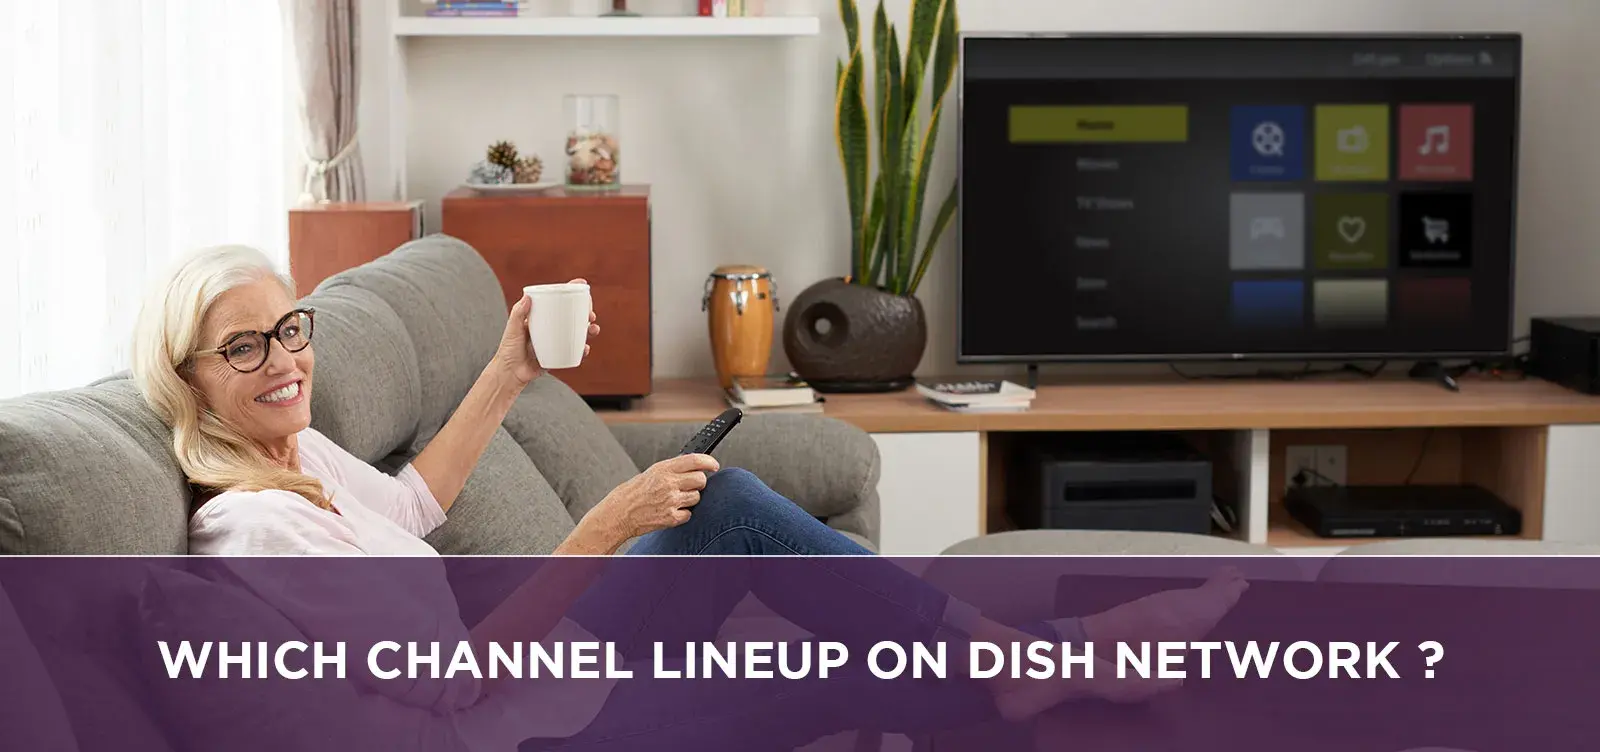 Which Channel Lineup on DISH Network?